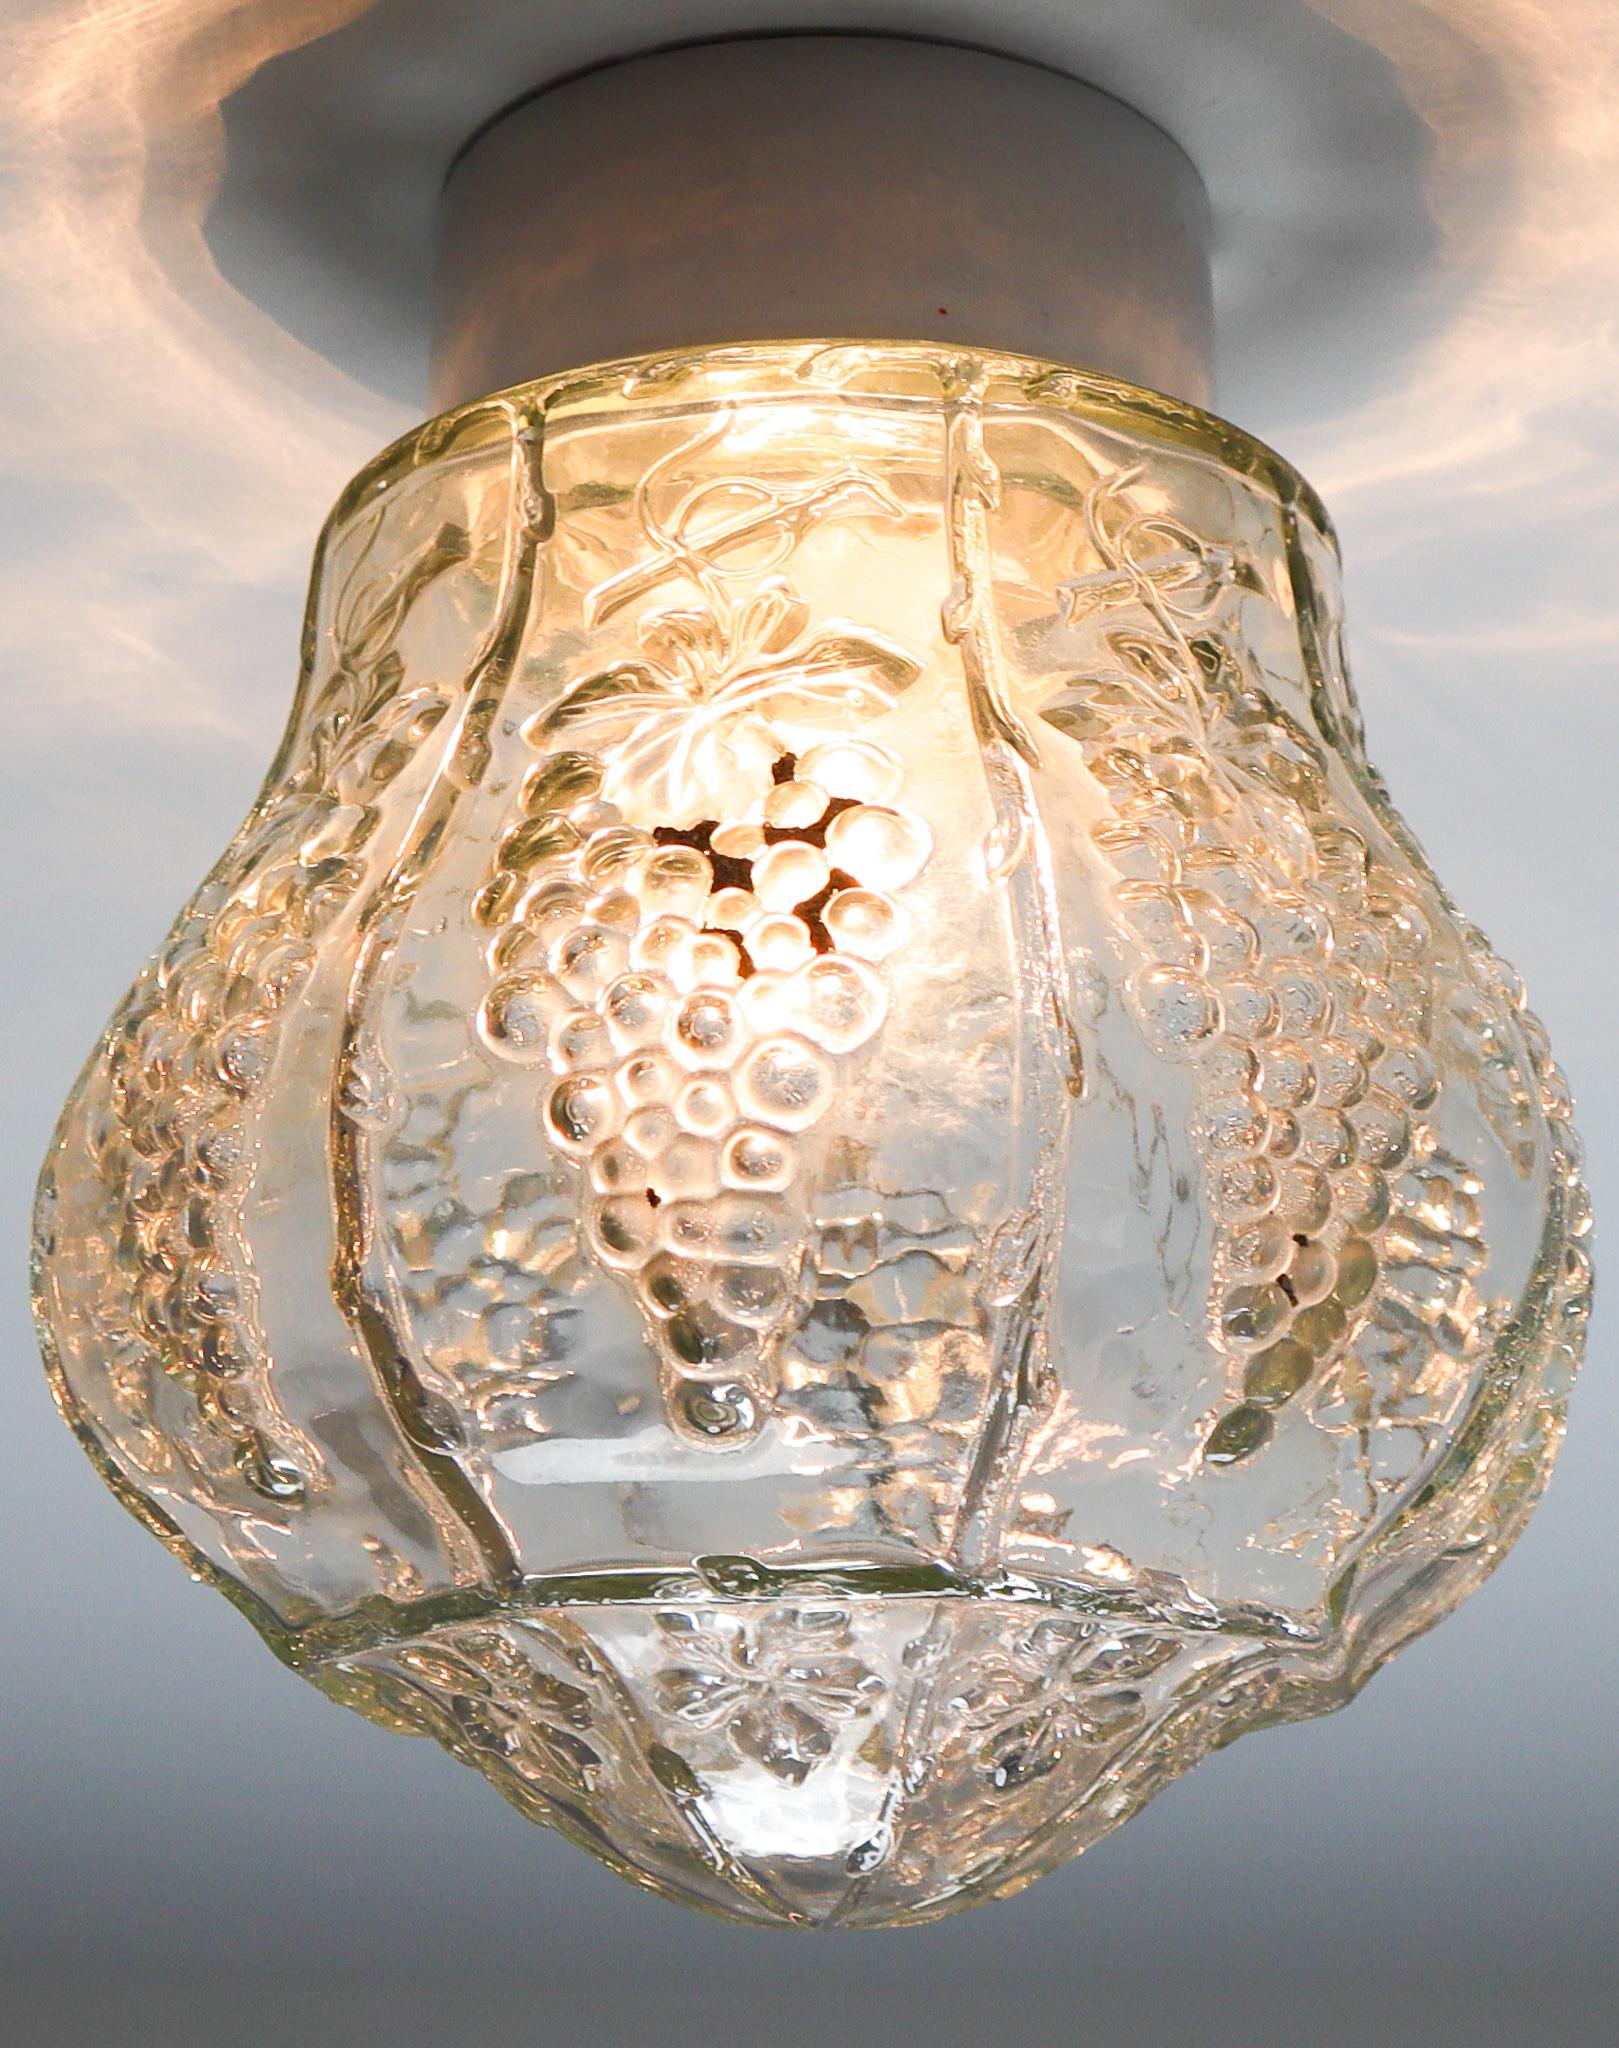 Set of two vintage modern wall/ceiling lights with clear structured glass and porcelain base, France 1930s. The glass has pattern in it, what gives a nice diffuse light effect and a nice pattern on ceiling and walls, these wall scones/ceiling lights